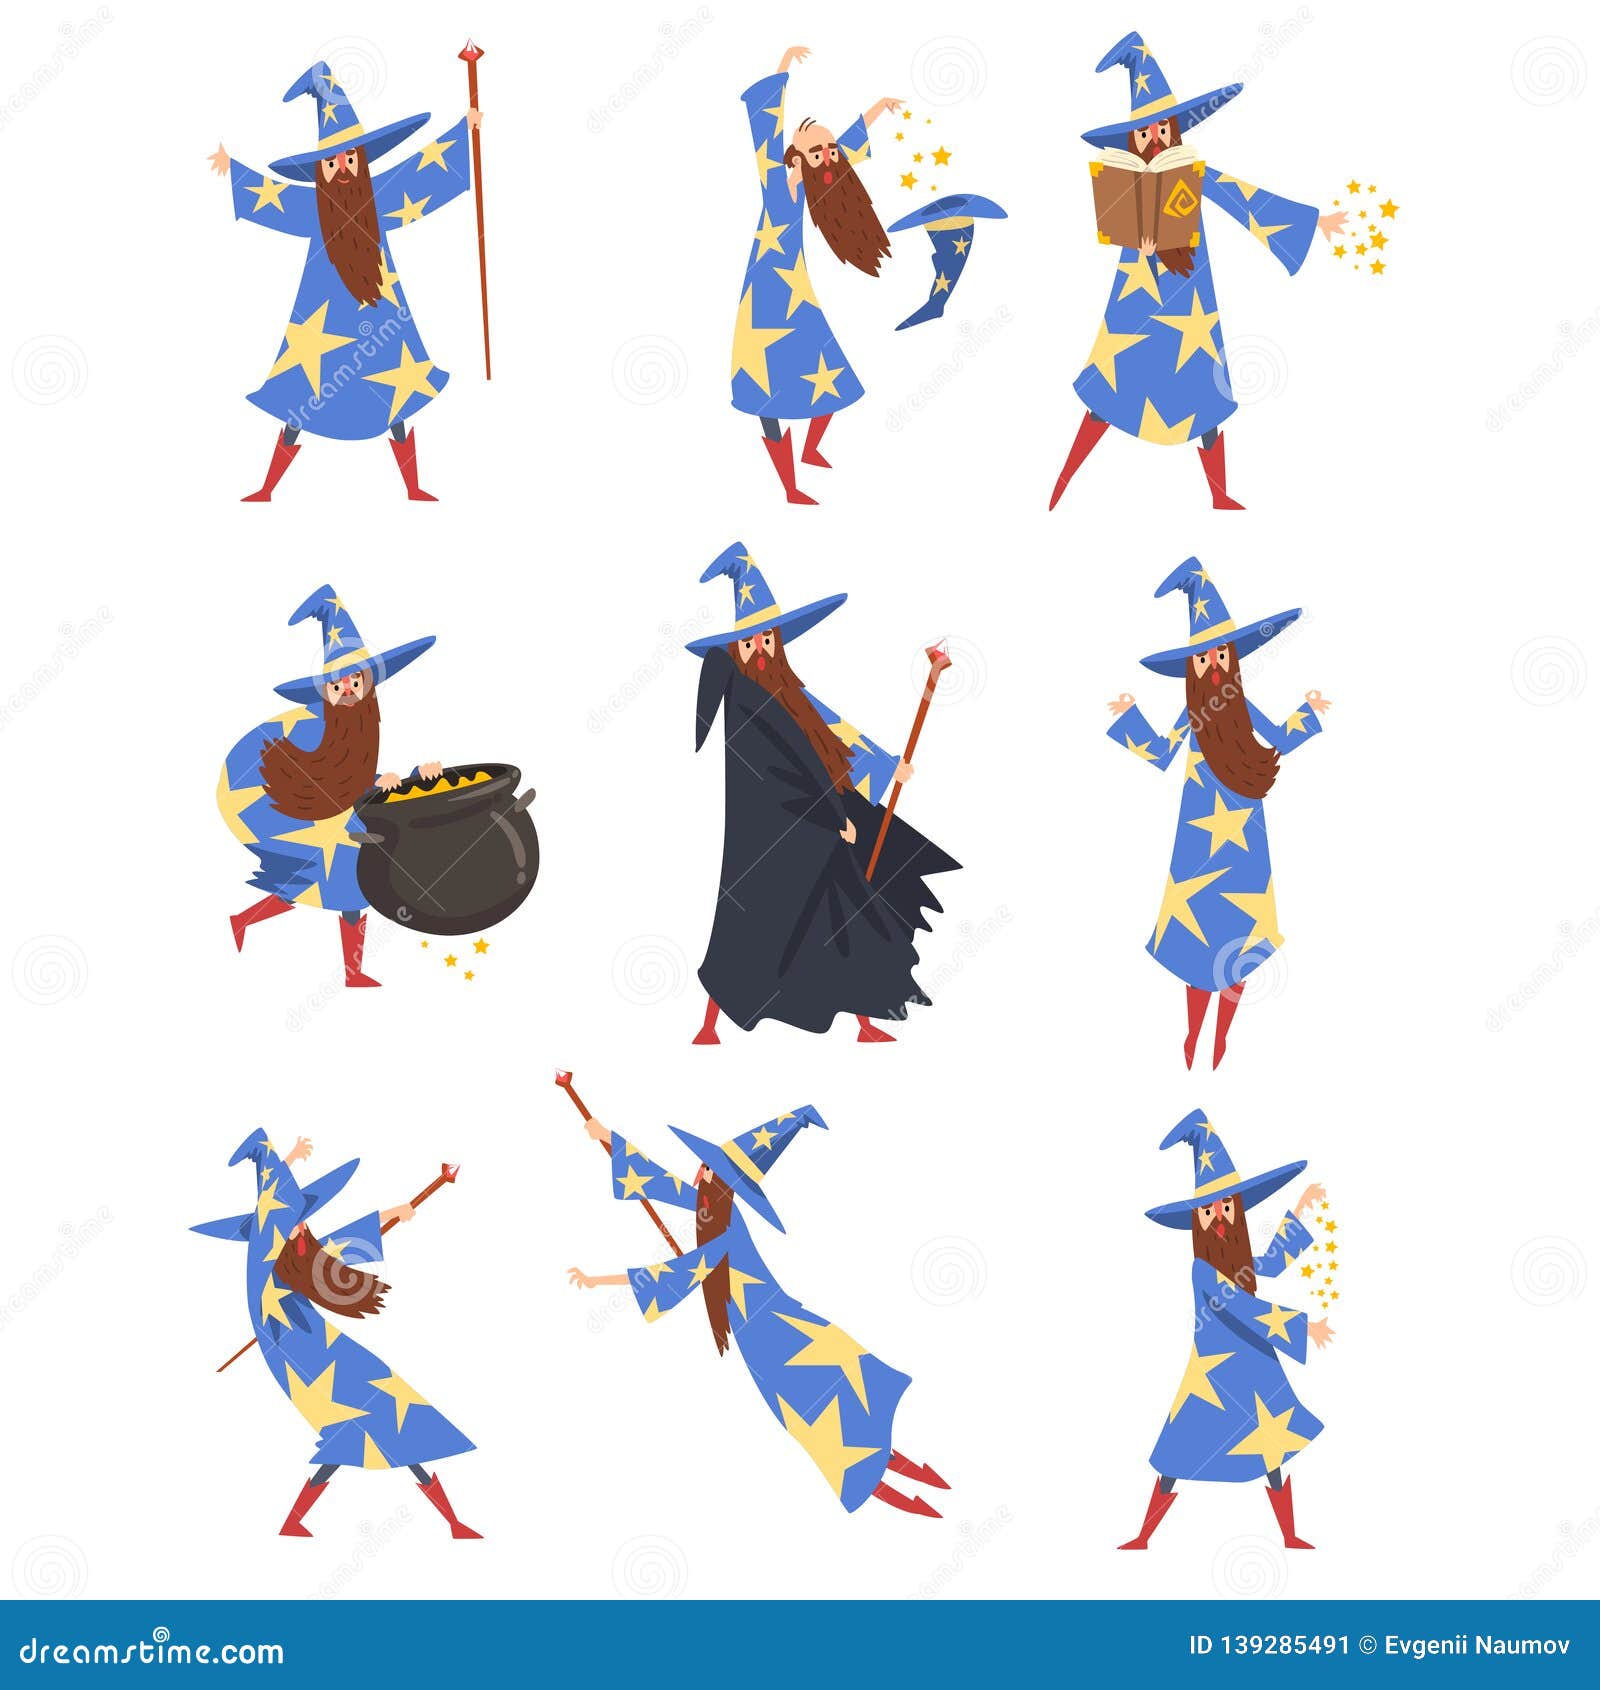 male sorcerer practicing wizardry set, wizard character wearing blue mantle with stars and pointed hat 